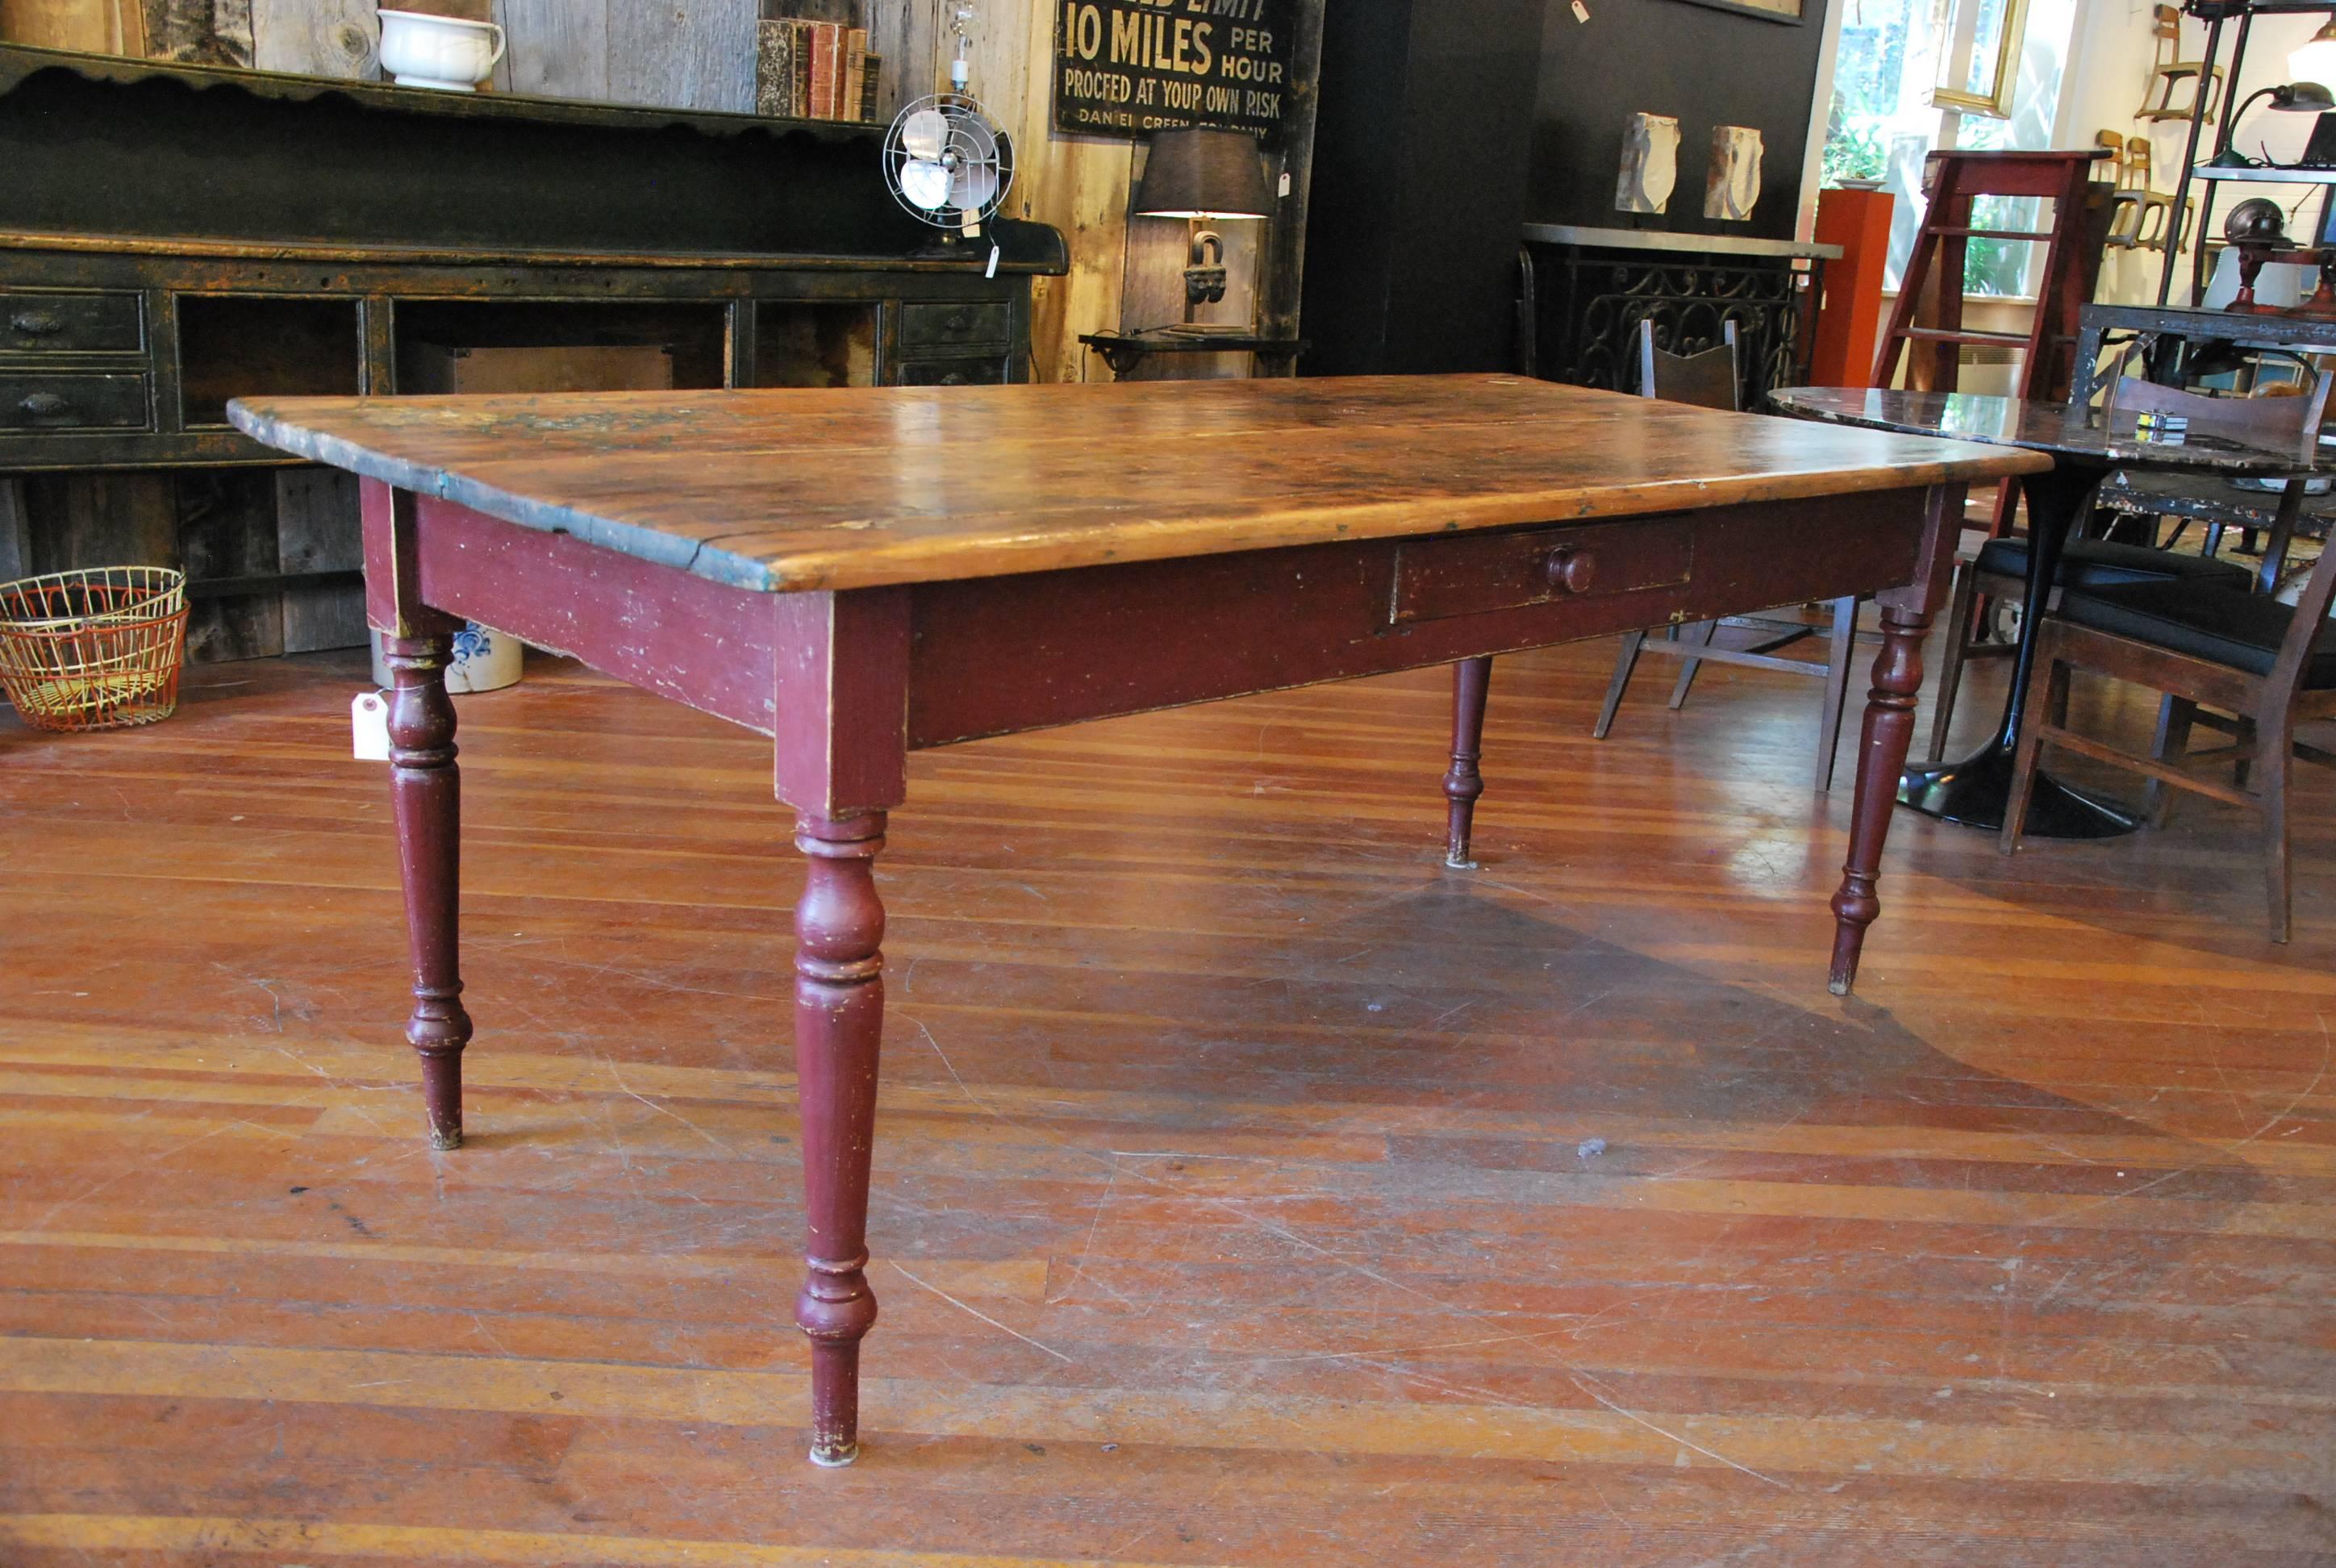 Very nice two board top authentic turned leg harvest table, with well-worn top and working utility drawer. Surface has a wax finish.
The base is polychromatic paint with an old red over blue green.

Found in Eastern Ontario, Canada.
Recently